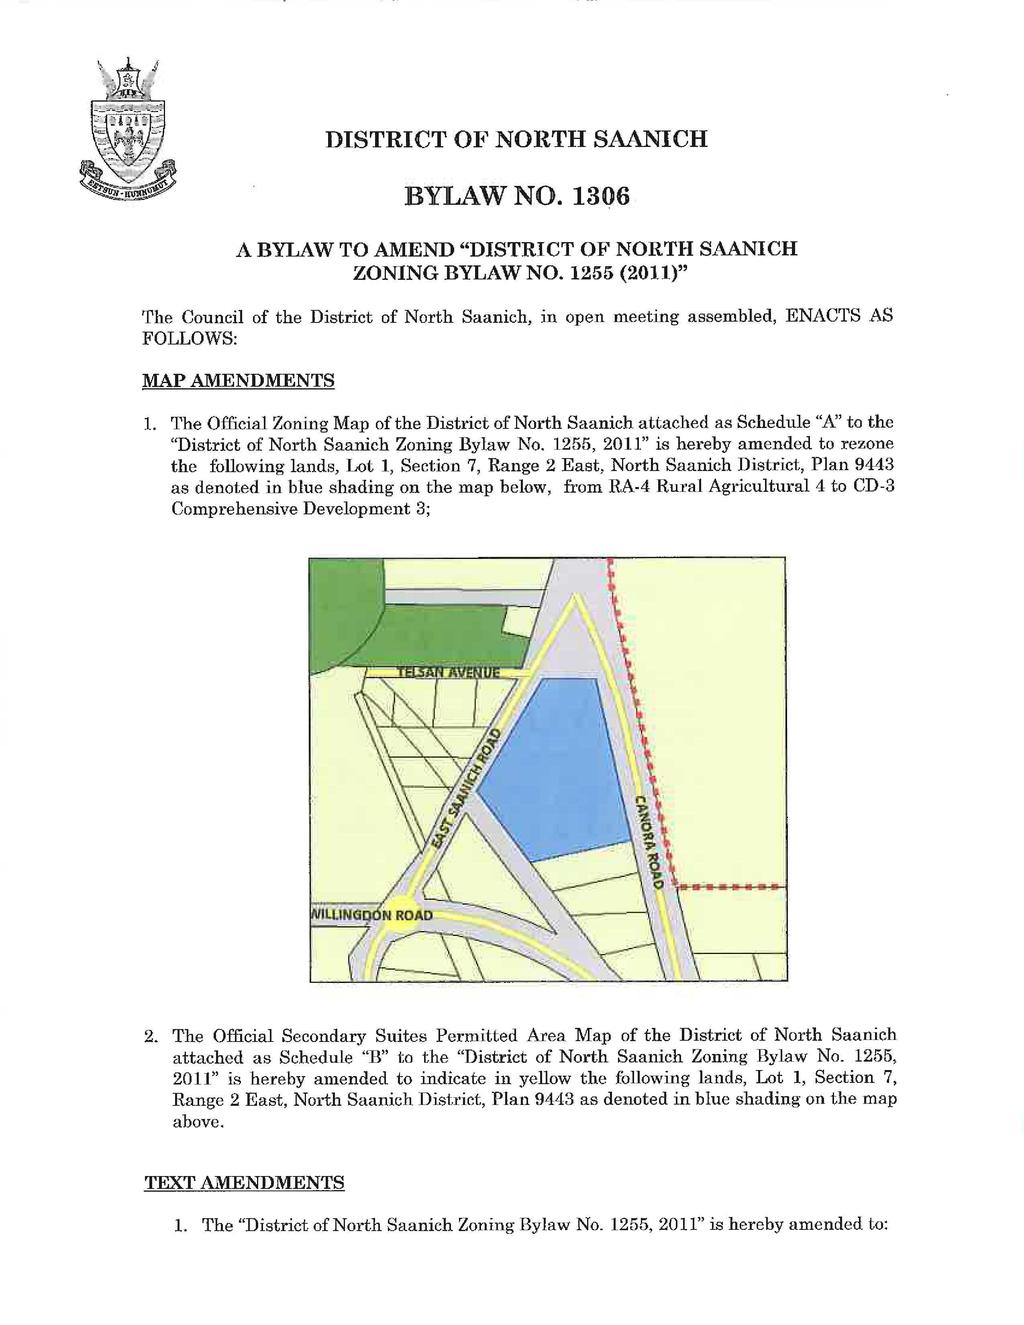 DISTRICT OF NORTH SAANICH BYLAW NO. 1306 A BYLAW TO AMEND "DISTRICT OF NORTH SAANICH ZONING BYLAW NO.